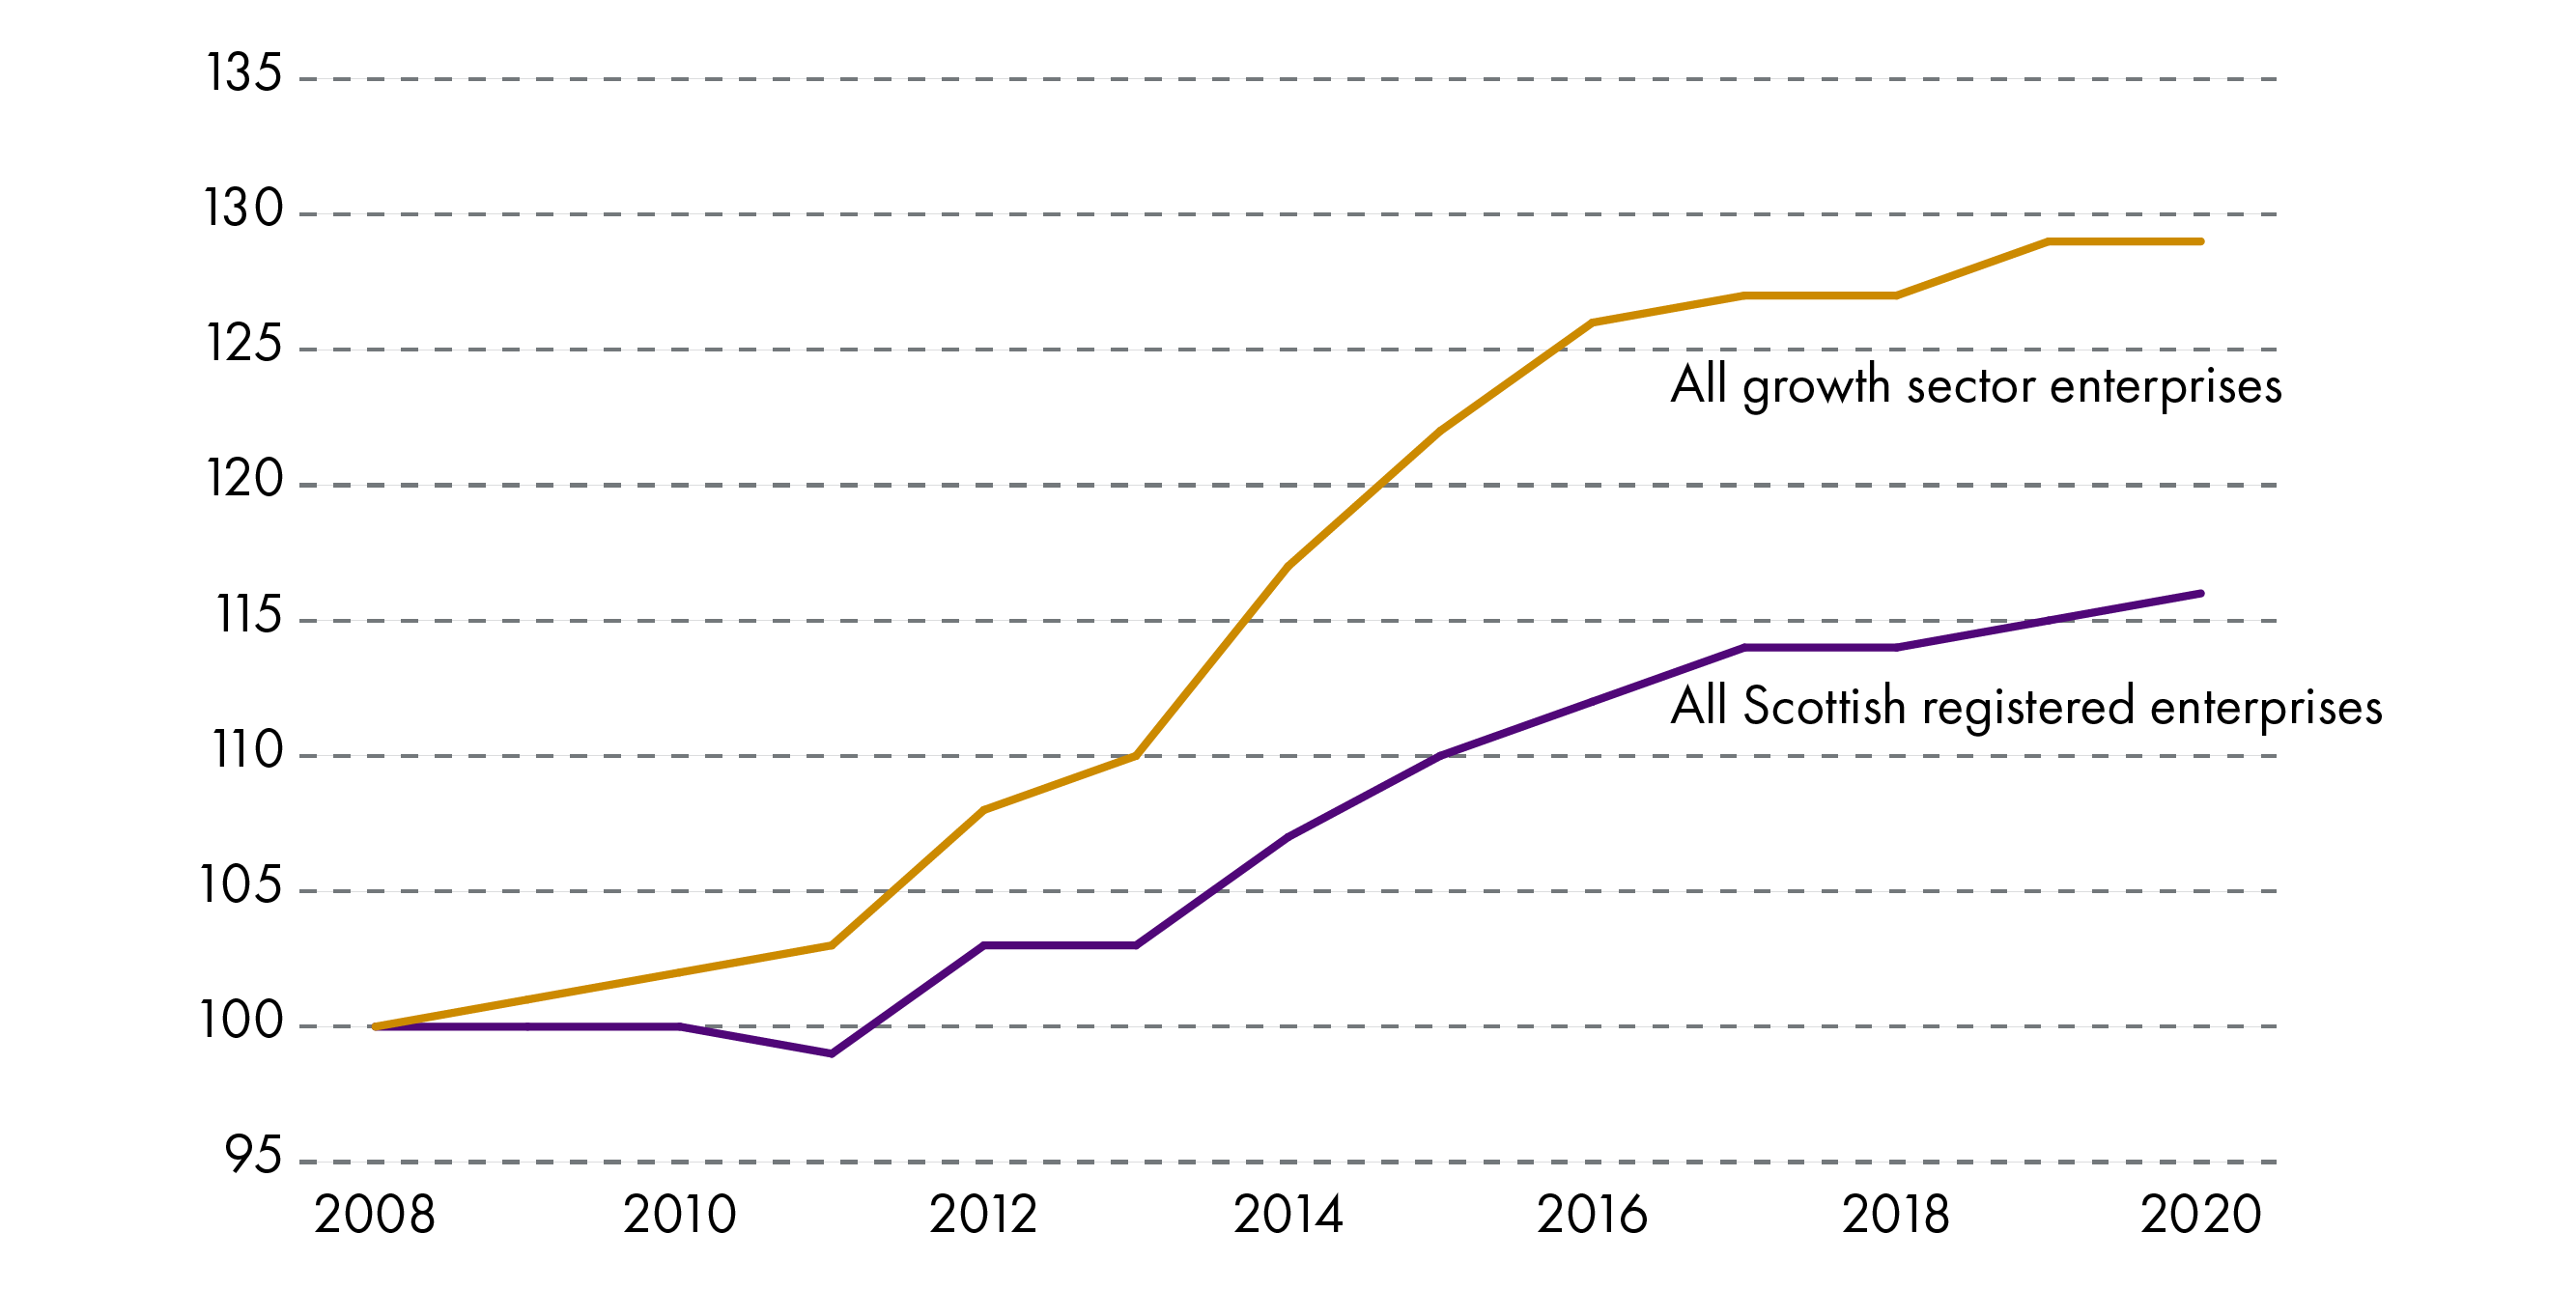 Between 2008 and 2020, the number of growth sector businesses in the economy grew by 29%, compared to 16% for all registered Scottish businesses.